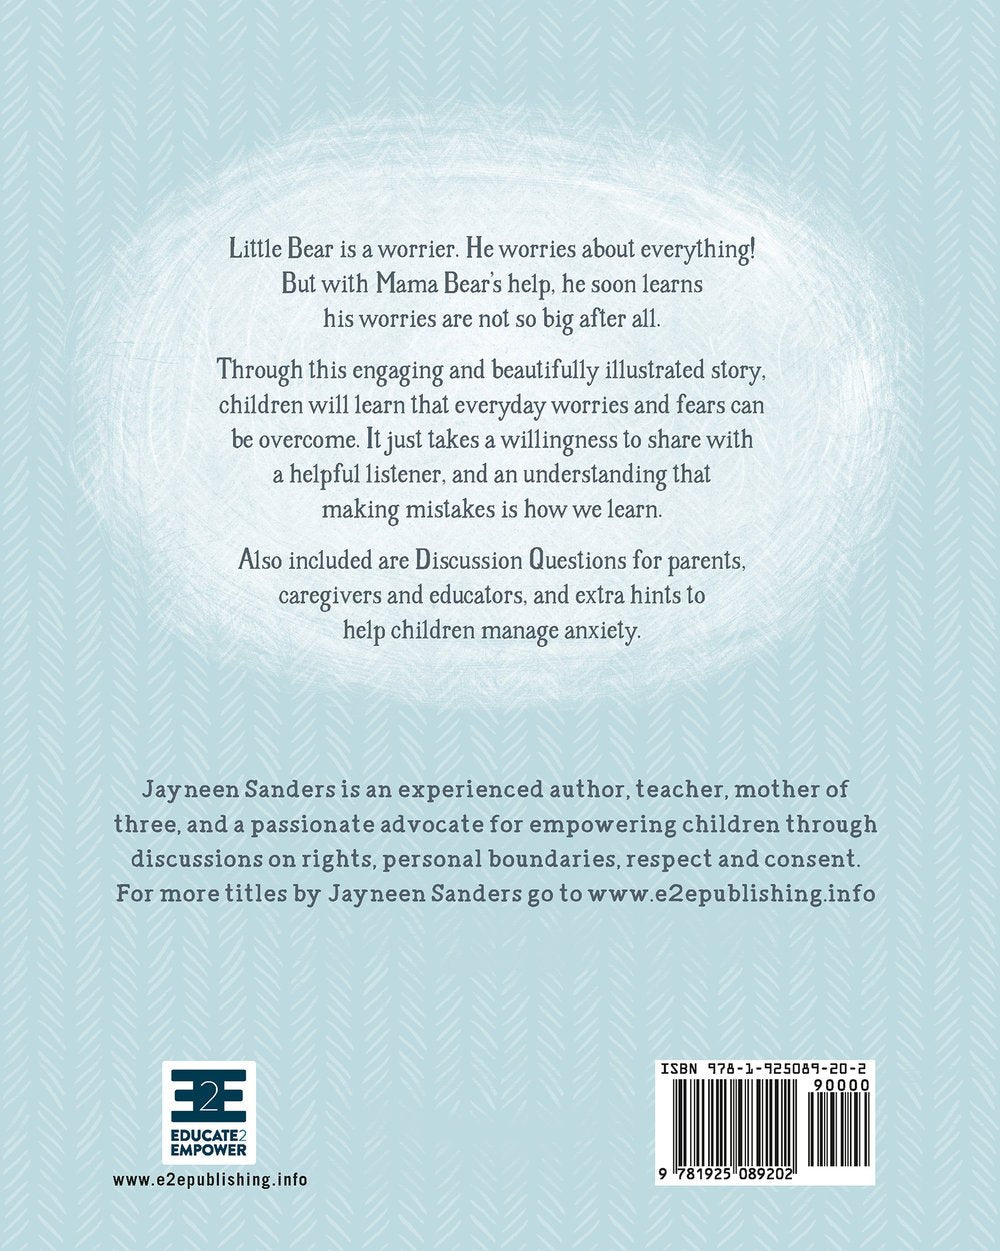 The back cover of the book ‘How Big Are Your Worries Little Bear?’ by Jayneen Sanders.